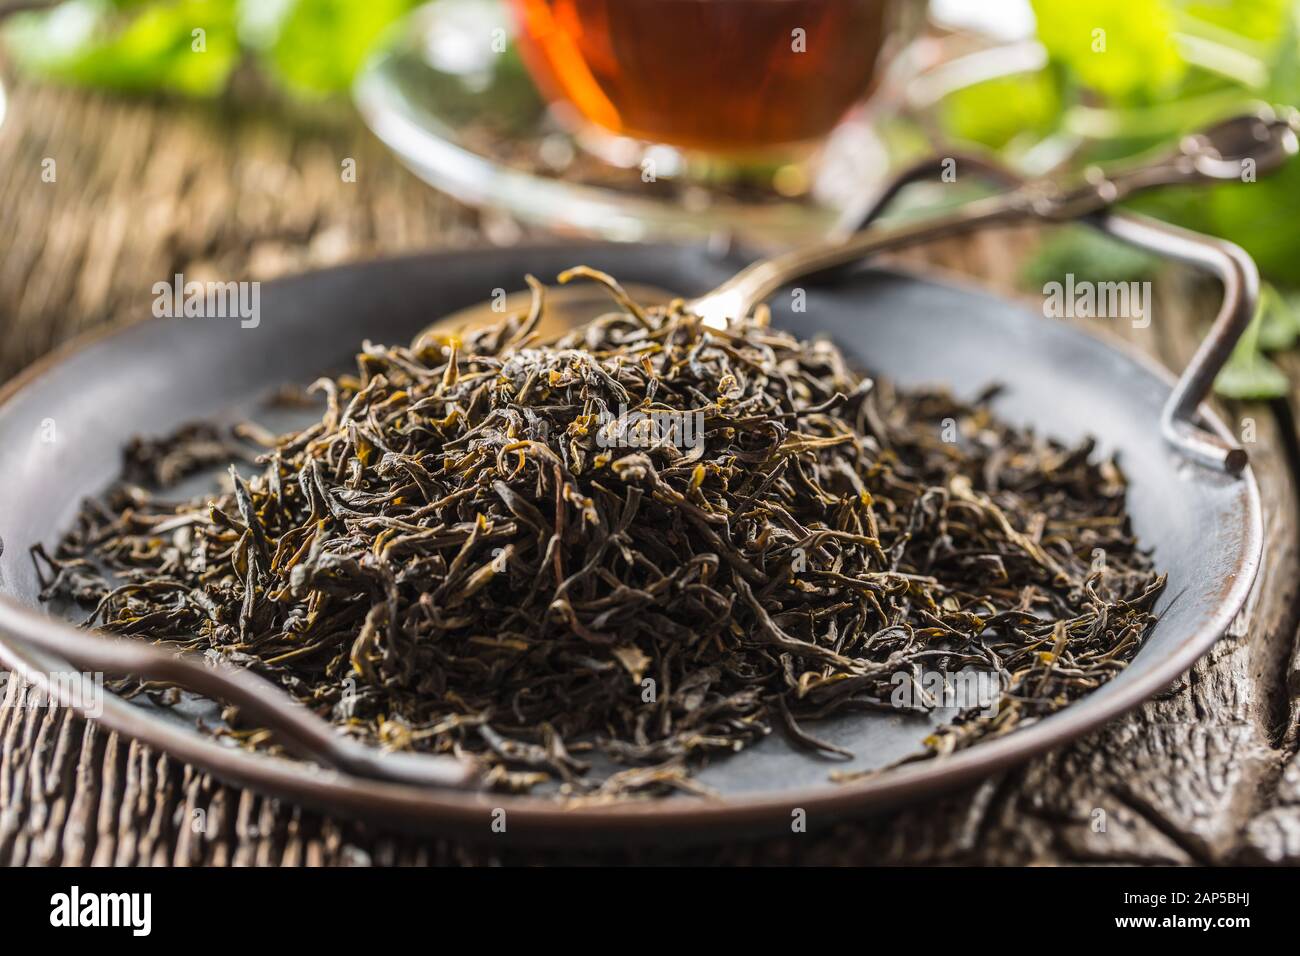 Dried tea leaves in bowl on rustic wooden table Stock Photo